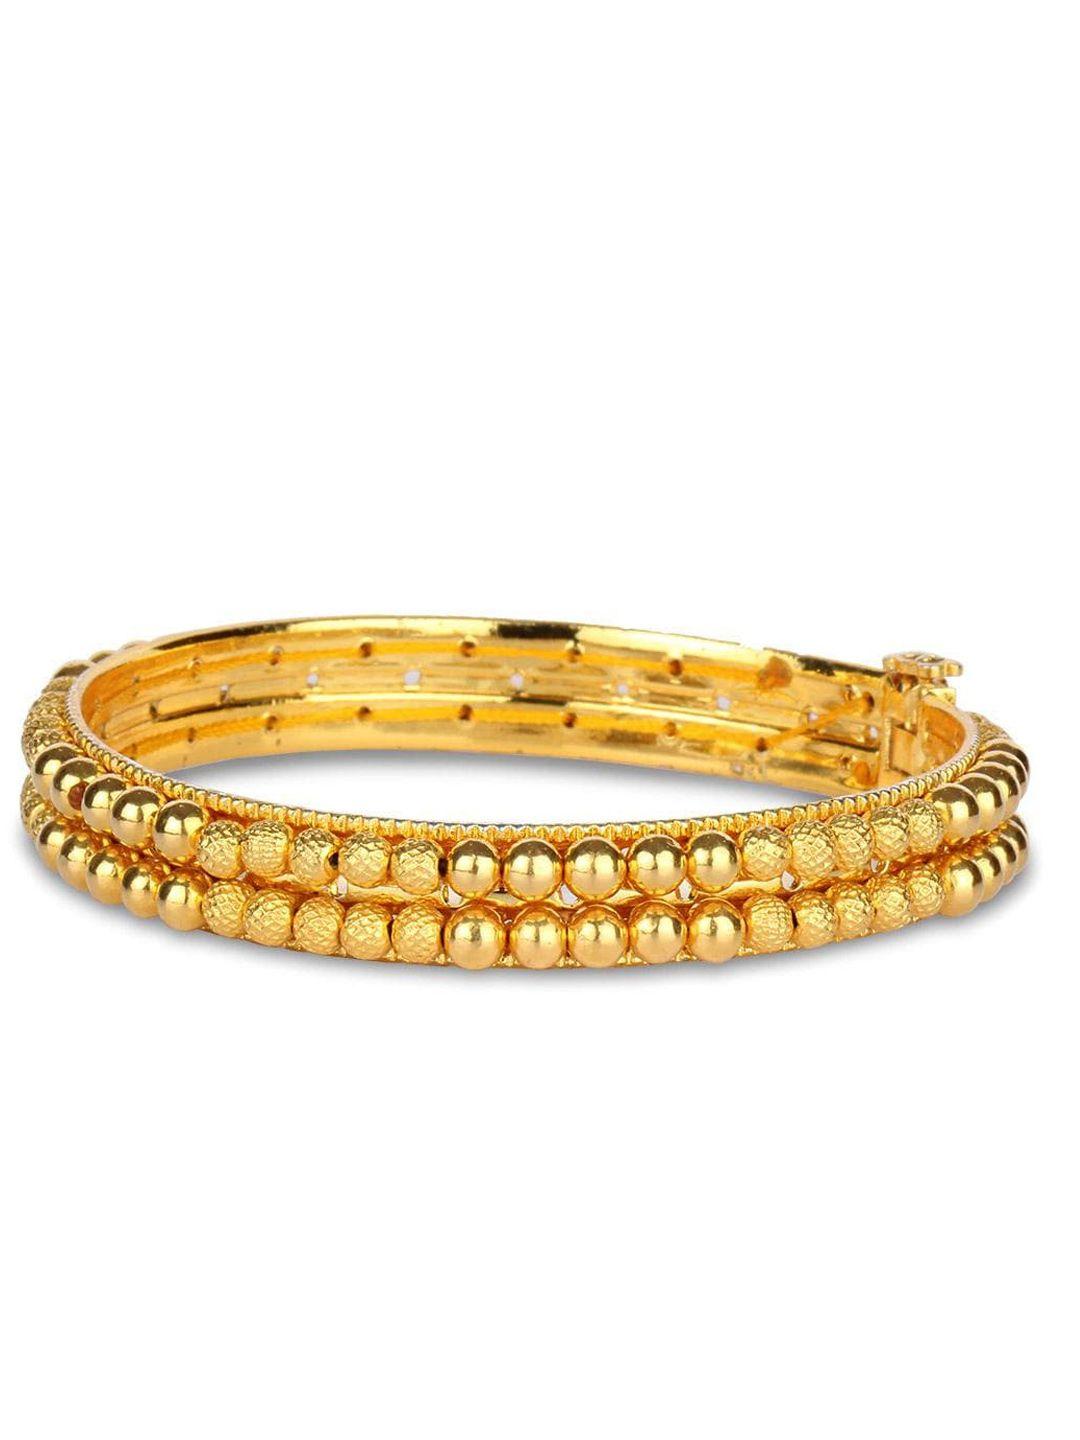 candere a kalyan jewellers company 22kt gold tushi bangle - 2.24 gm